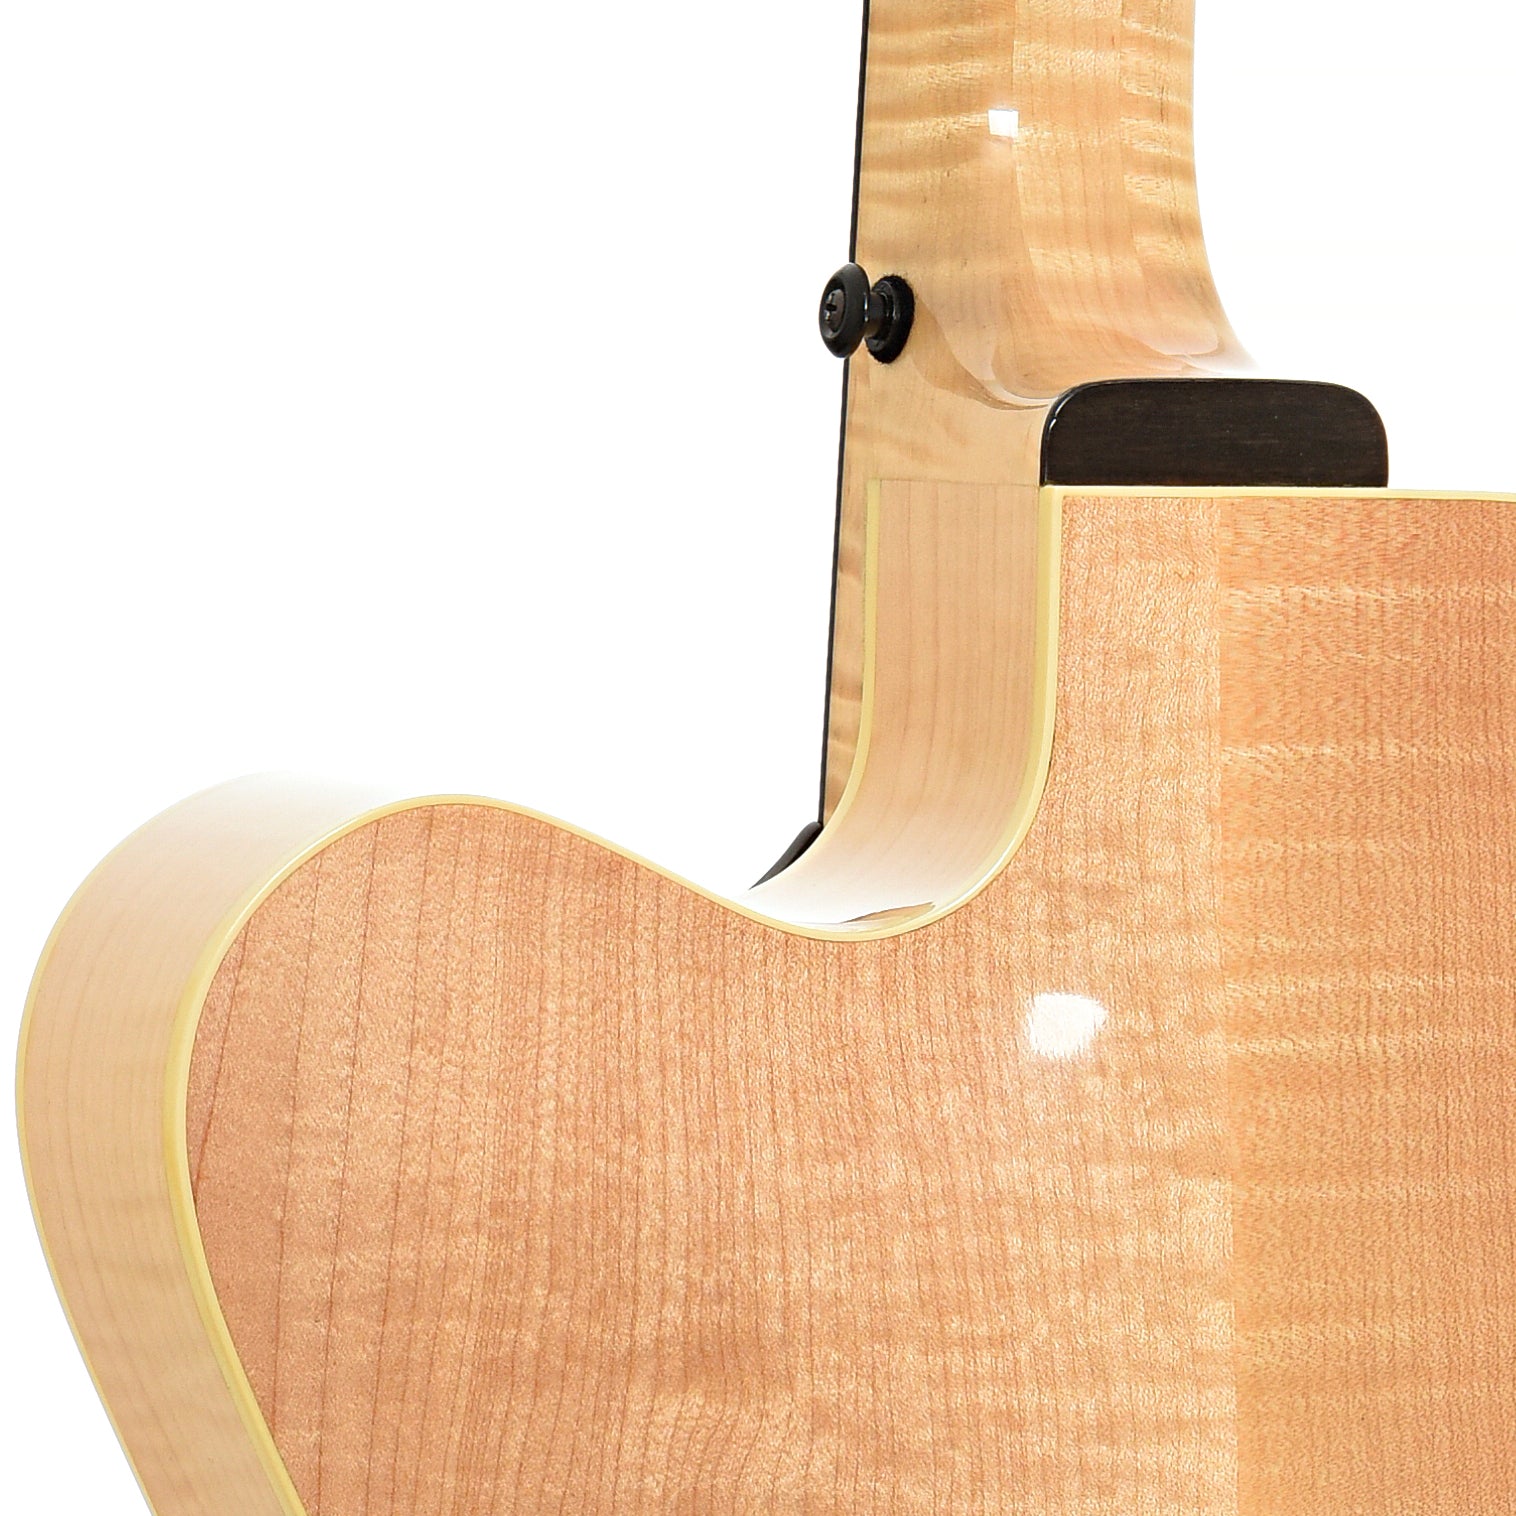 Neck joint of C. Dygard Gallup School Archtop Guitar (c.2014)